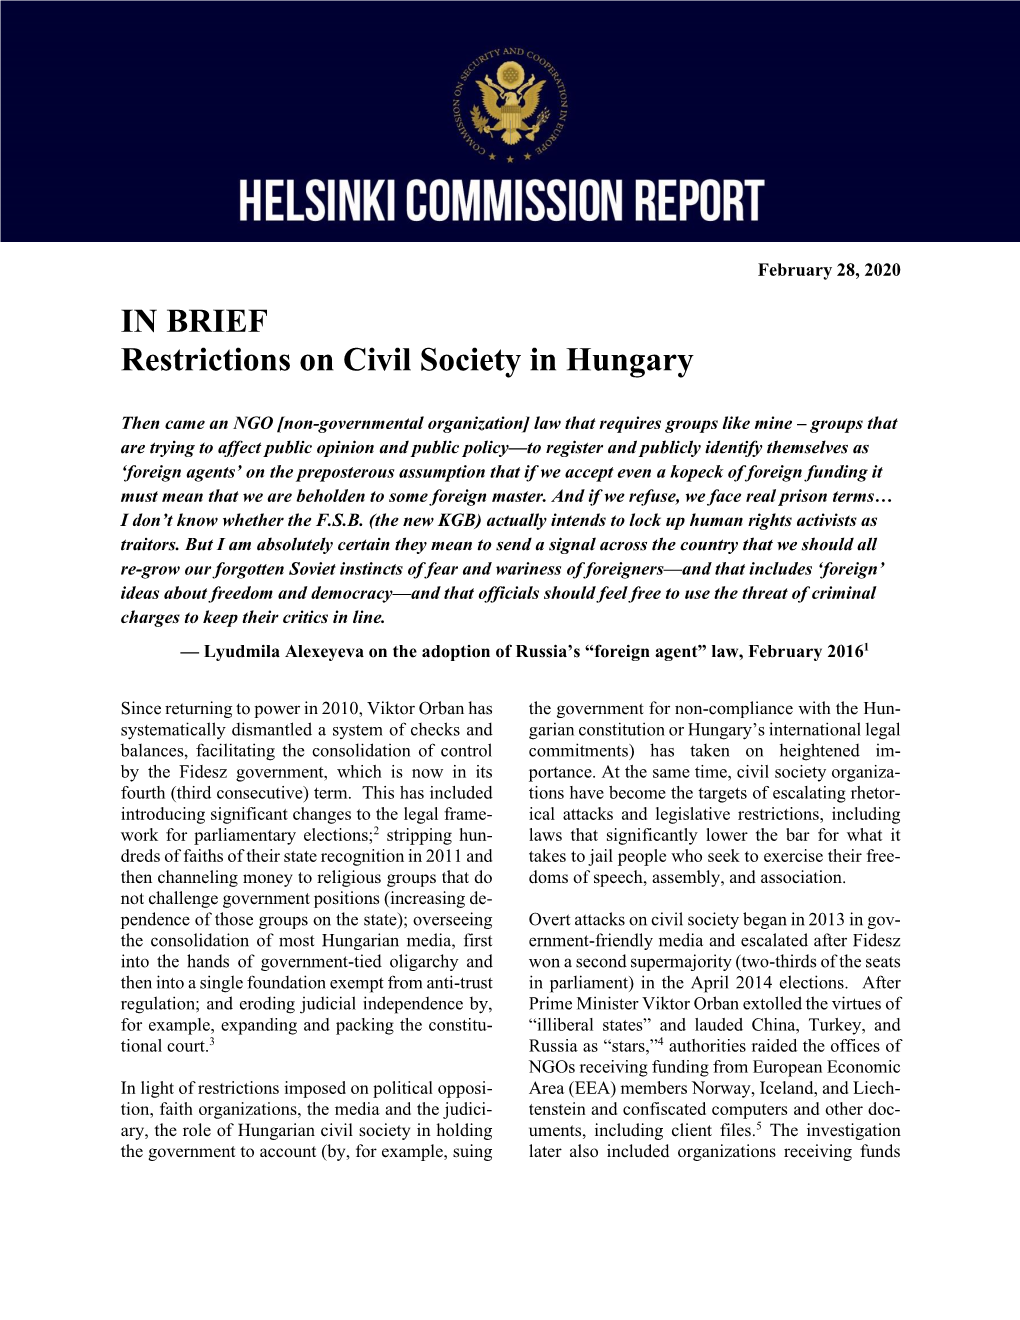 Restrictions on Civil Society in Hungary.Pdf